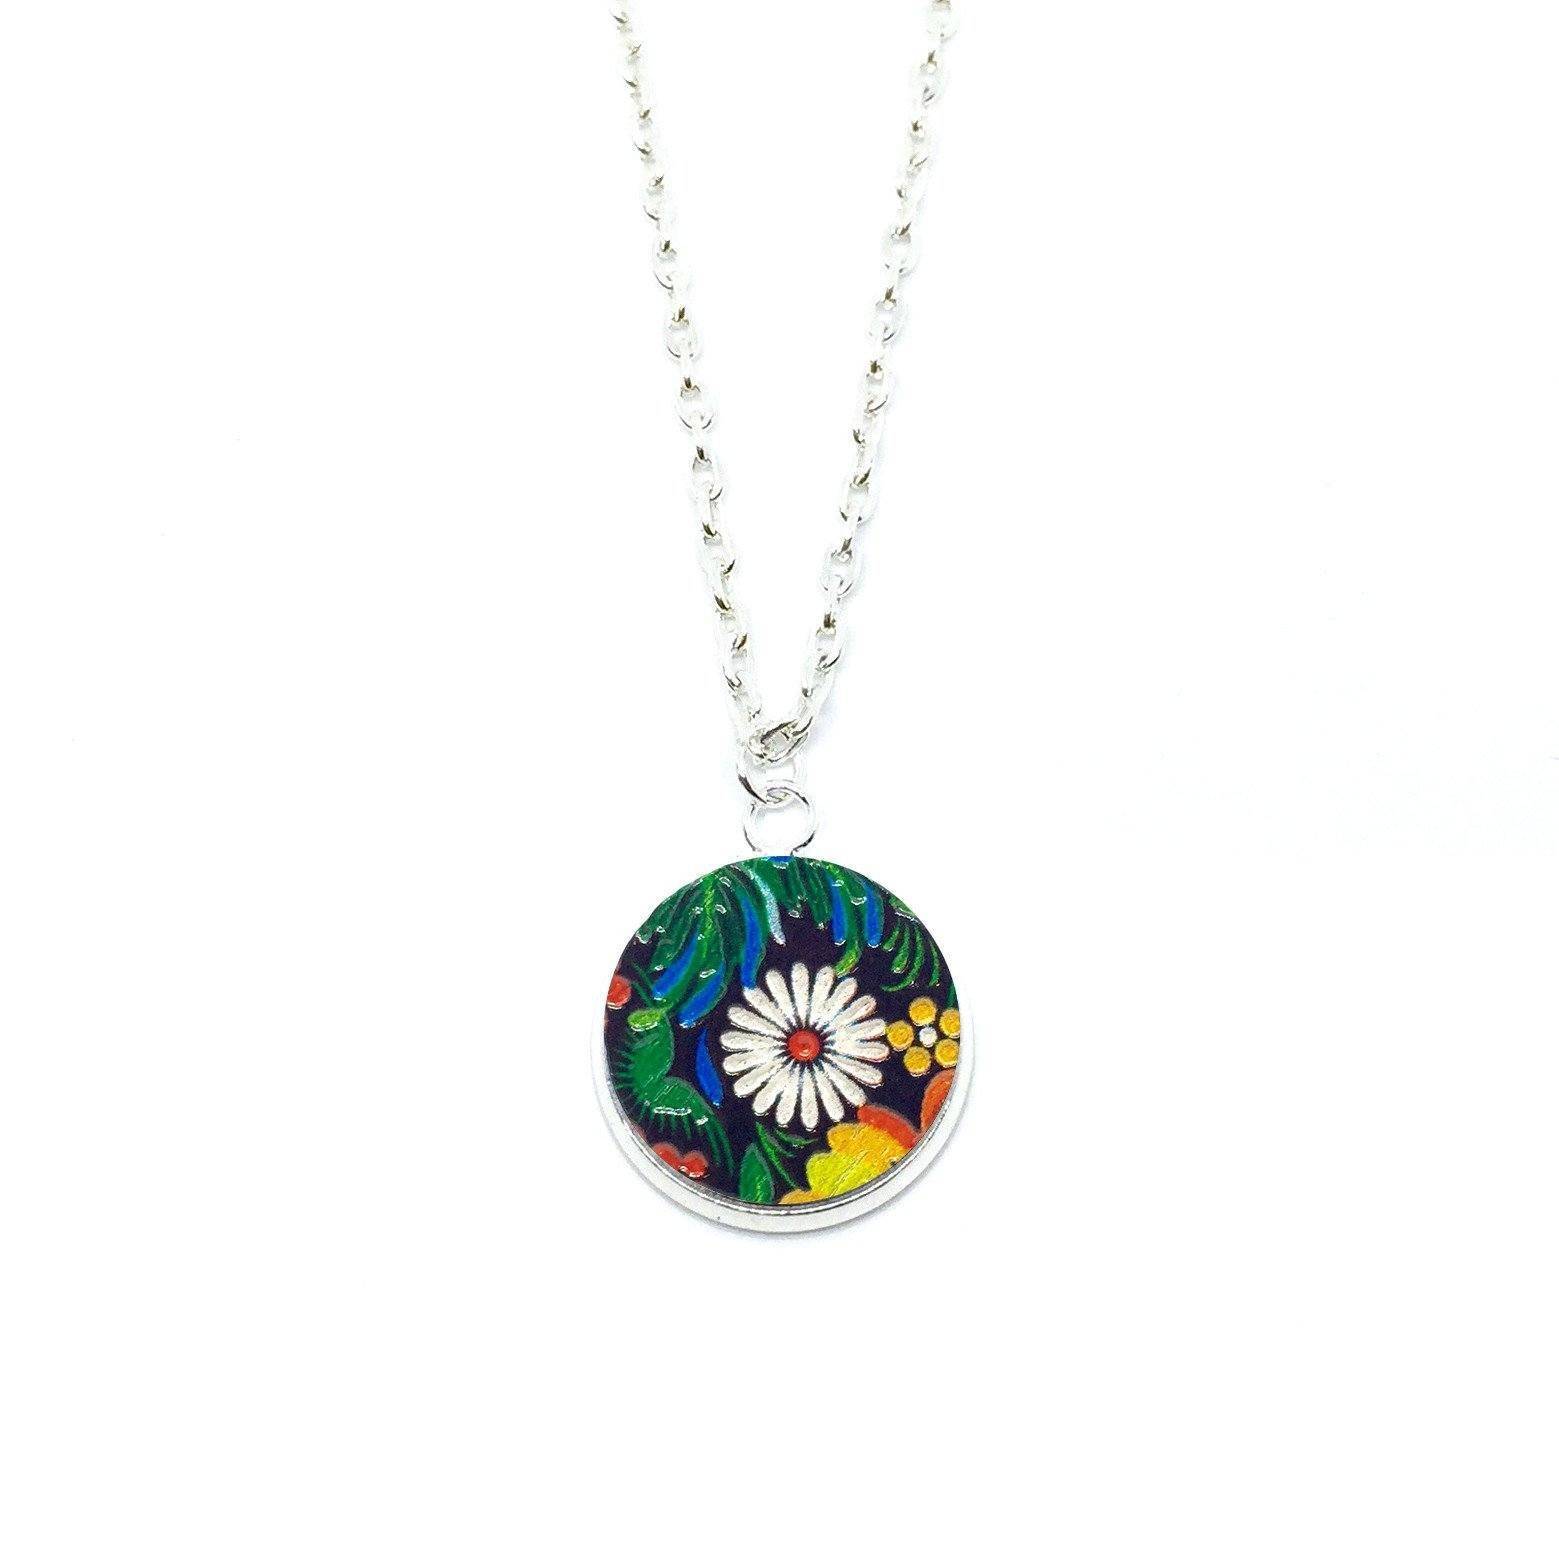 Dark Garden Daisy Wood Pendant Necklace - Necklaces - Paperdaise Accessories - Naiise